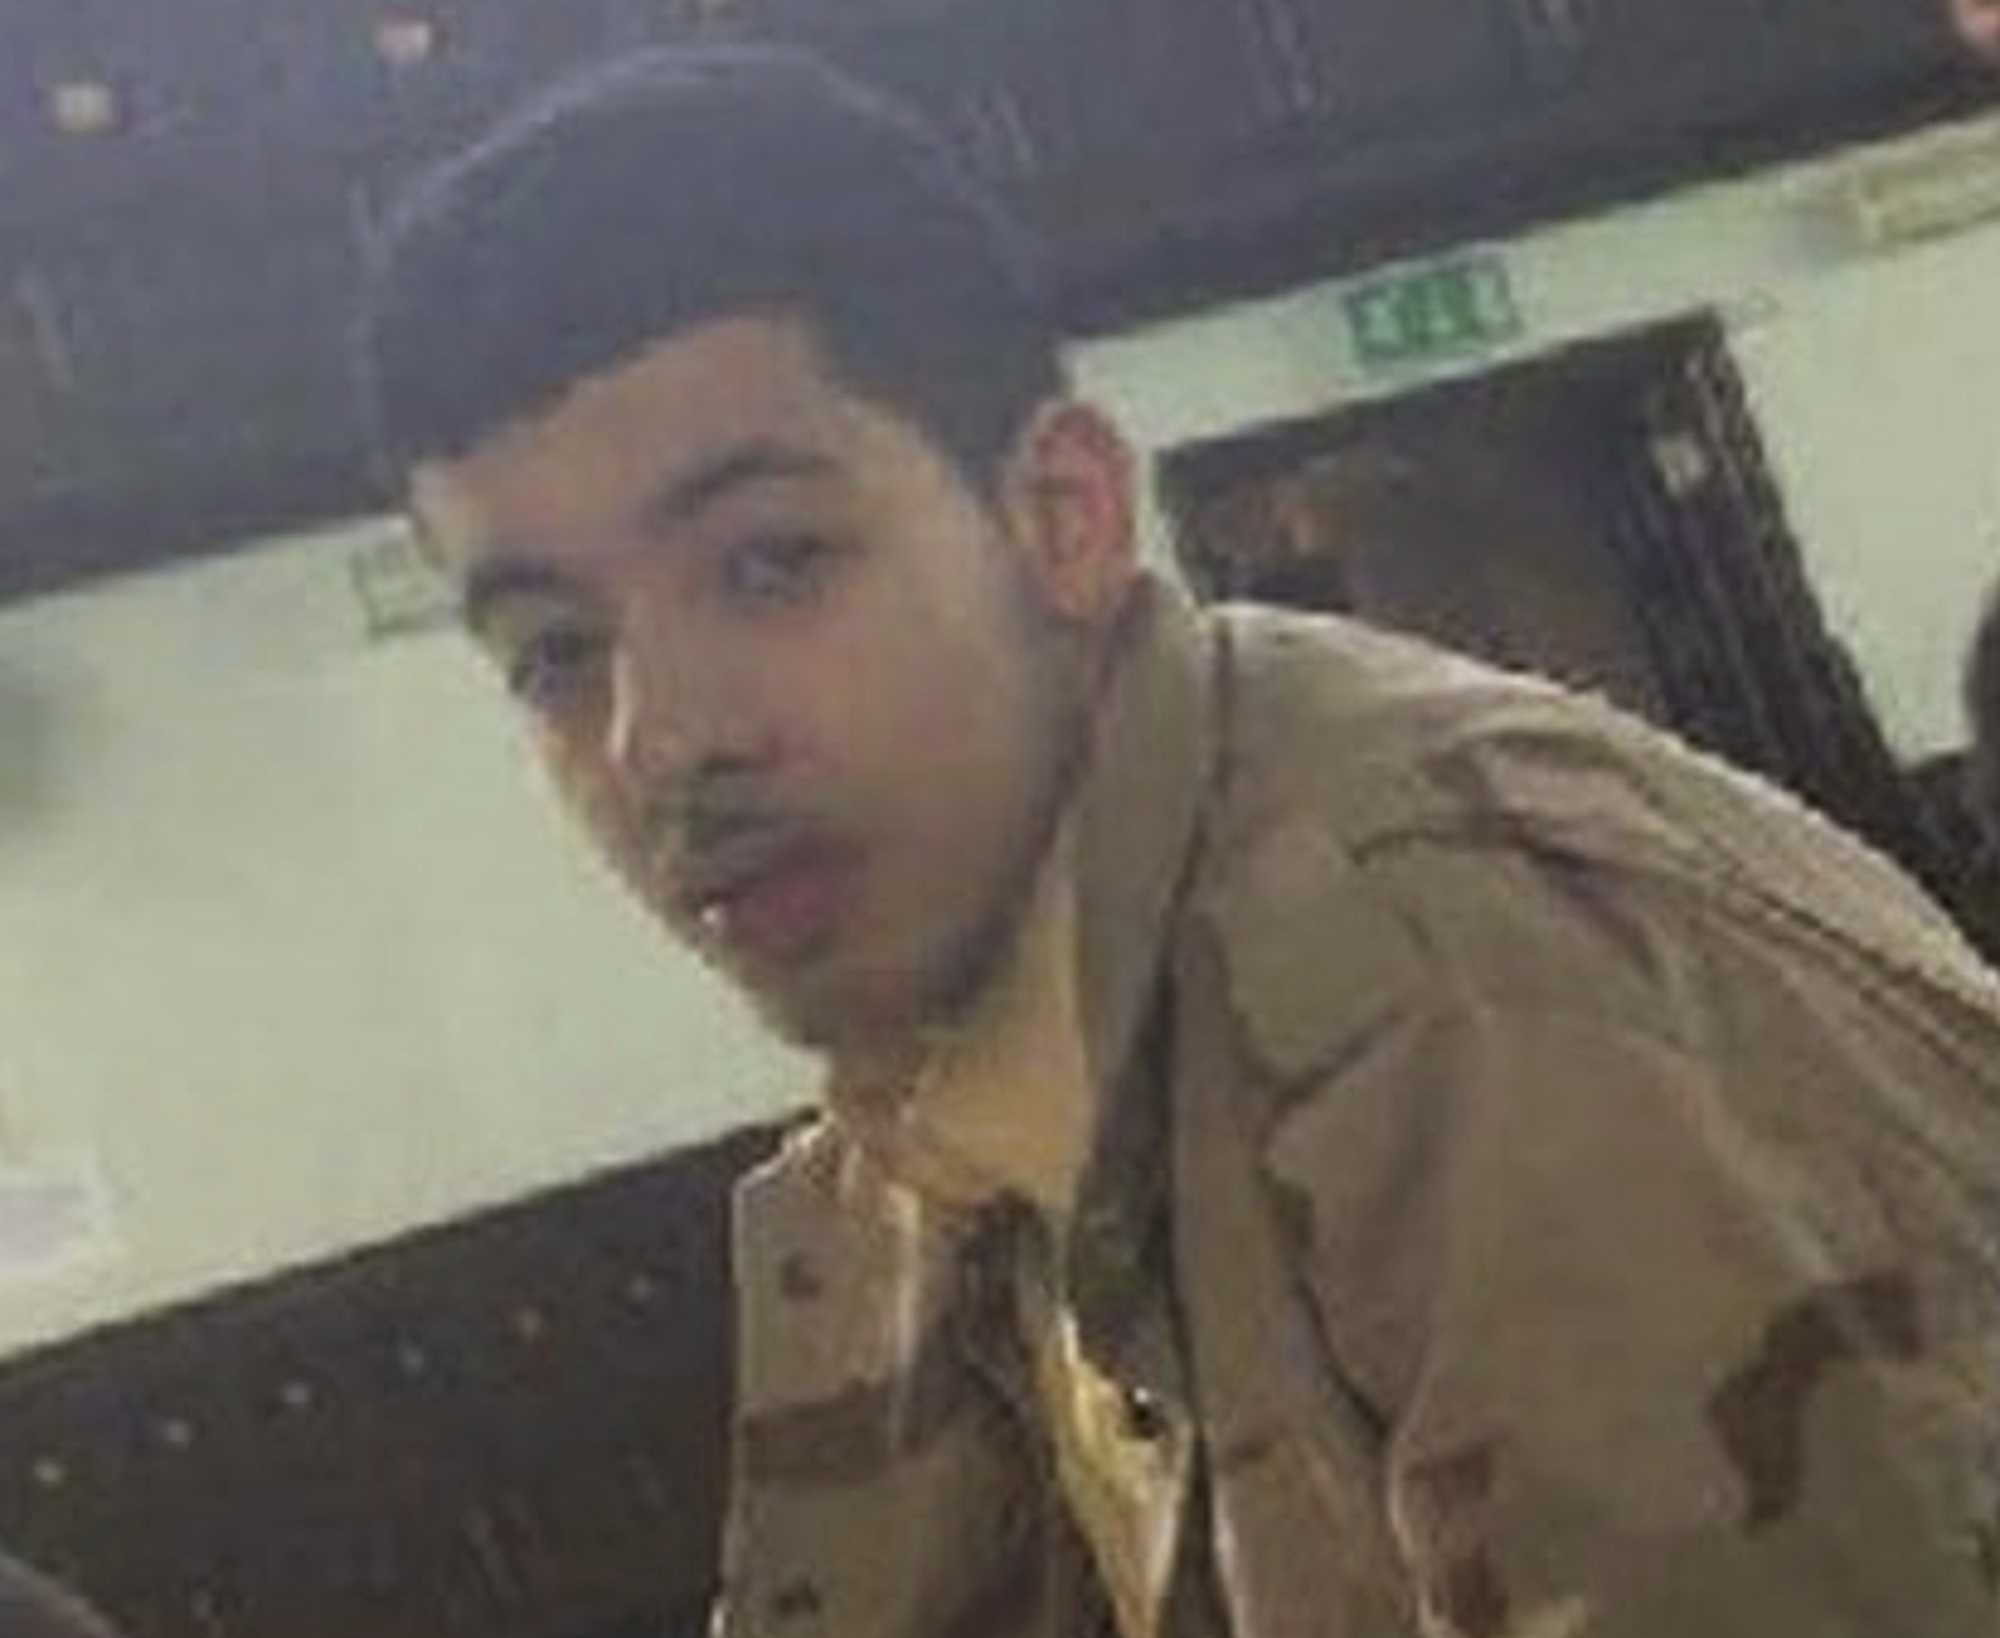 Libyan officials: Suspected UK concert bomber's brother knew 'all the details' of plot